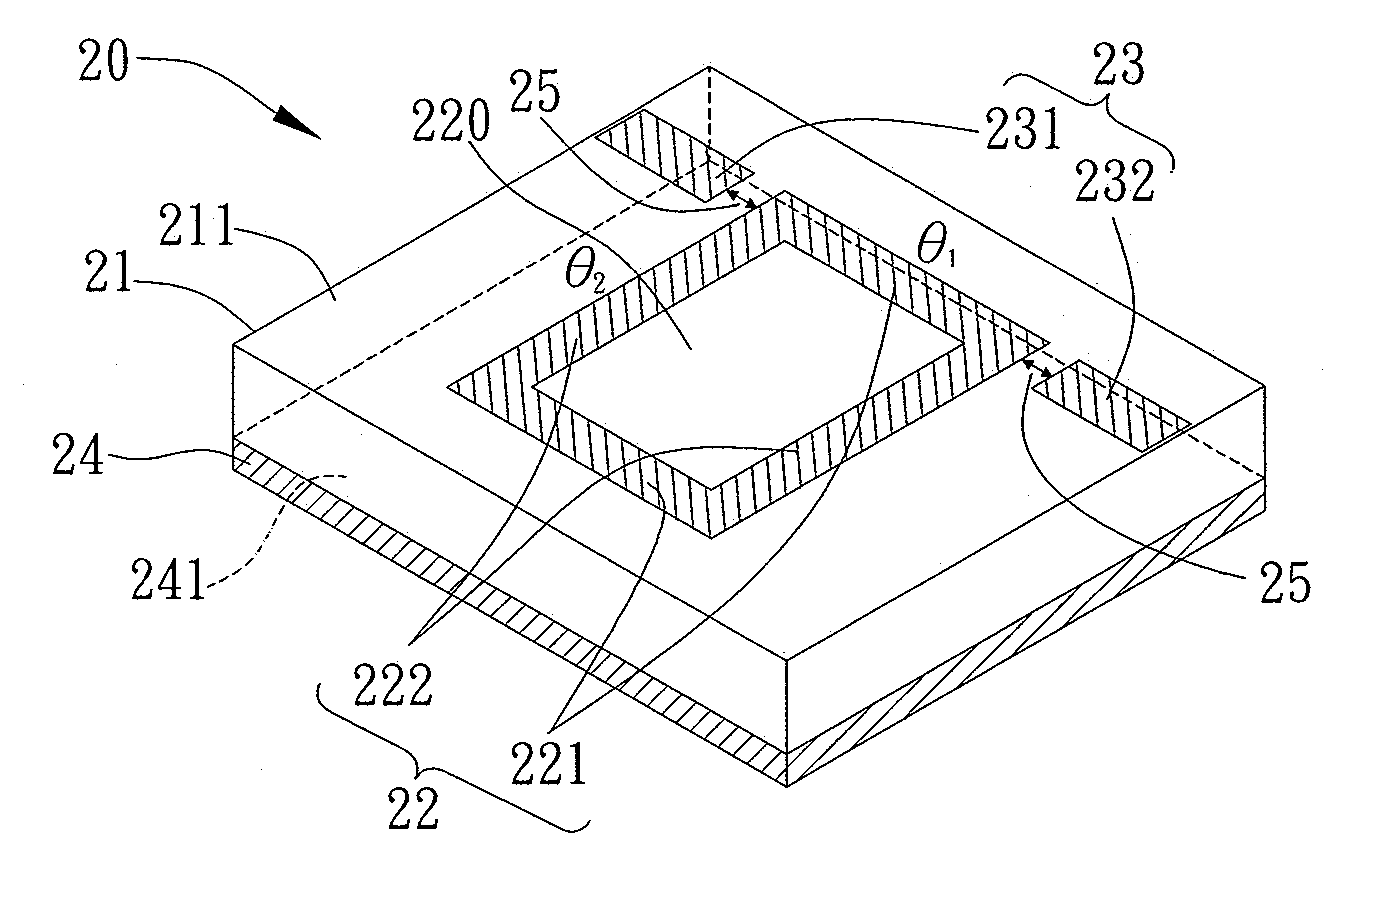 Filter device with finite transmission zeros